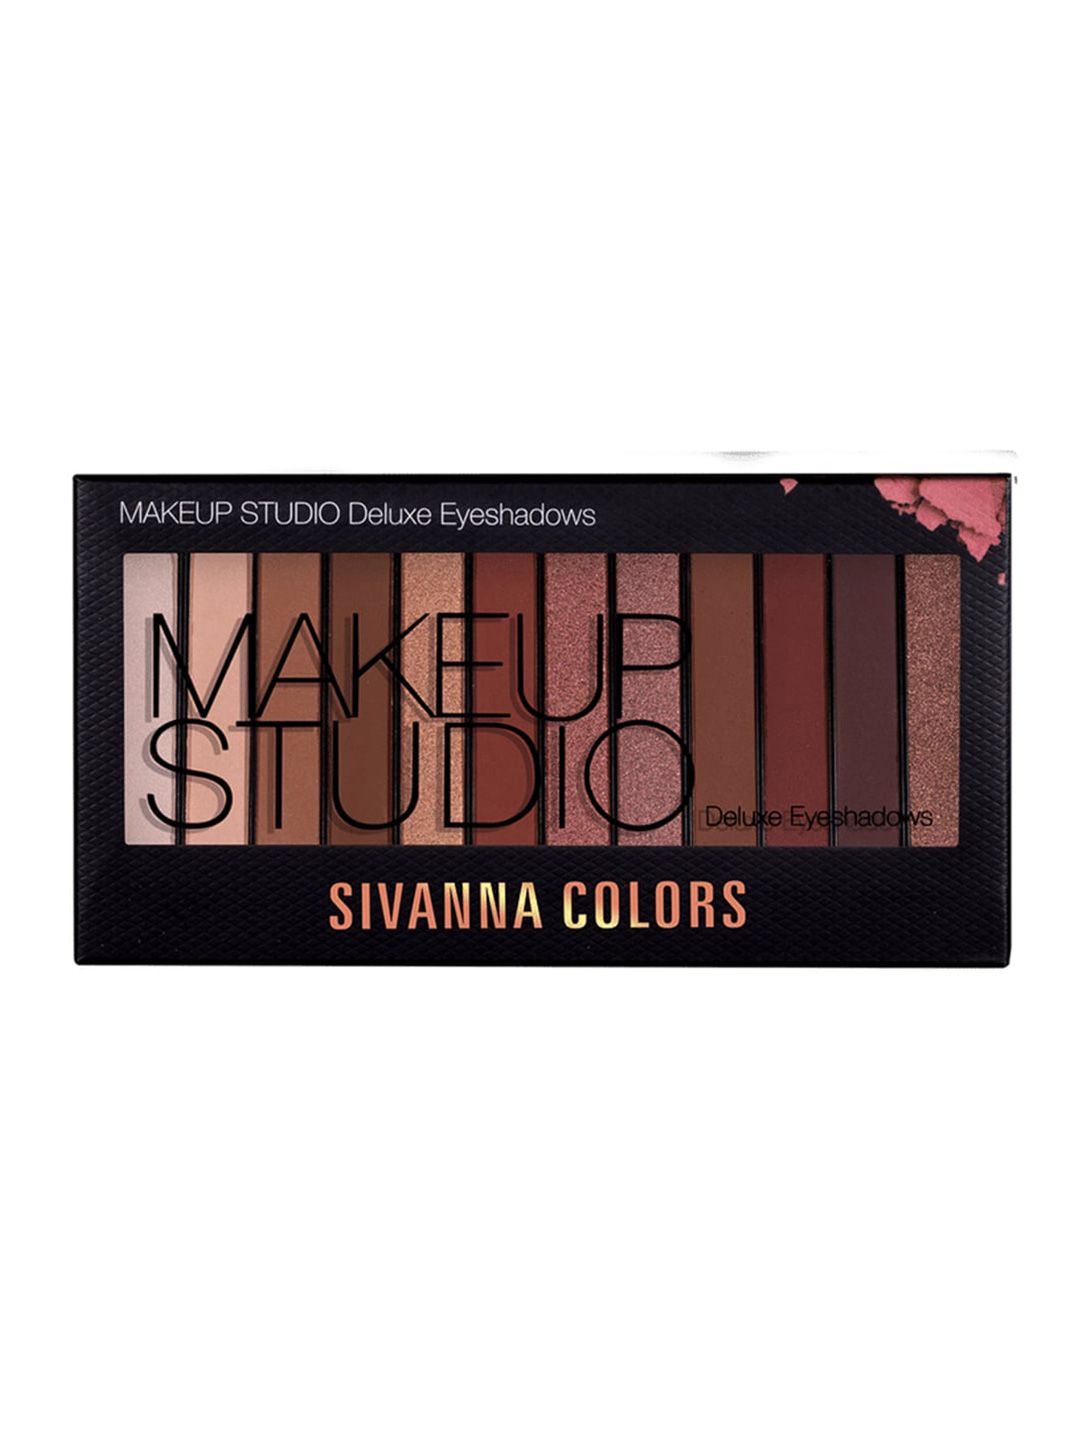 Sivanna Colors Make Up Studio Deluxe Eyeshadow Palette - HF202 05 Price in India